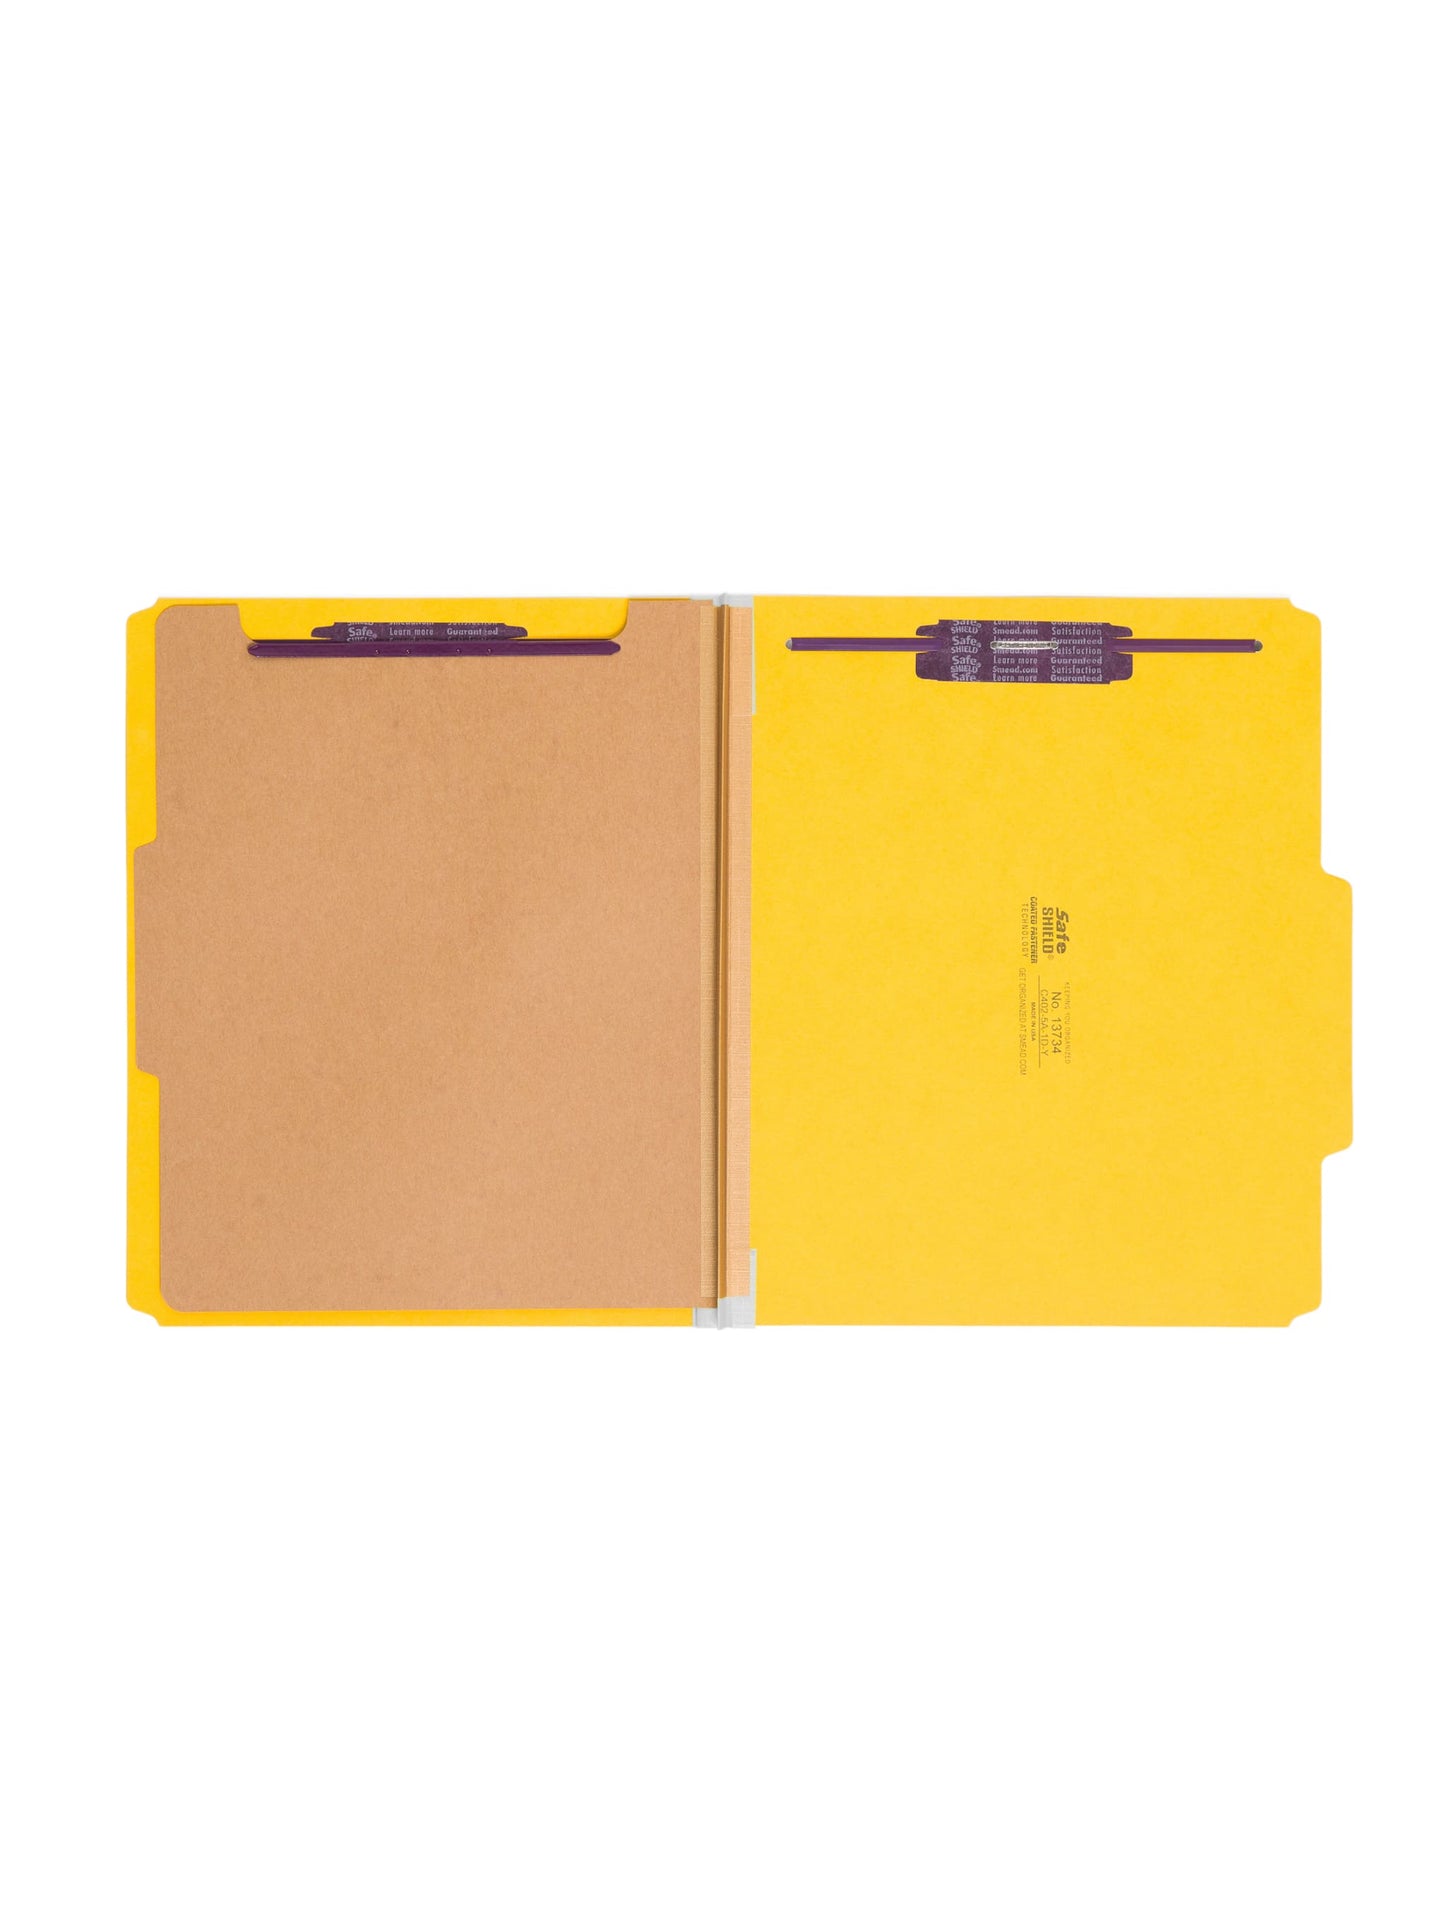 SafeSHIELD® Pressboard Classification File Folders, 1 Divider, 2 inch Expansion, Yellow Color, Letter Size, Set of 0, 30086486137349